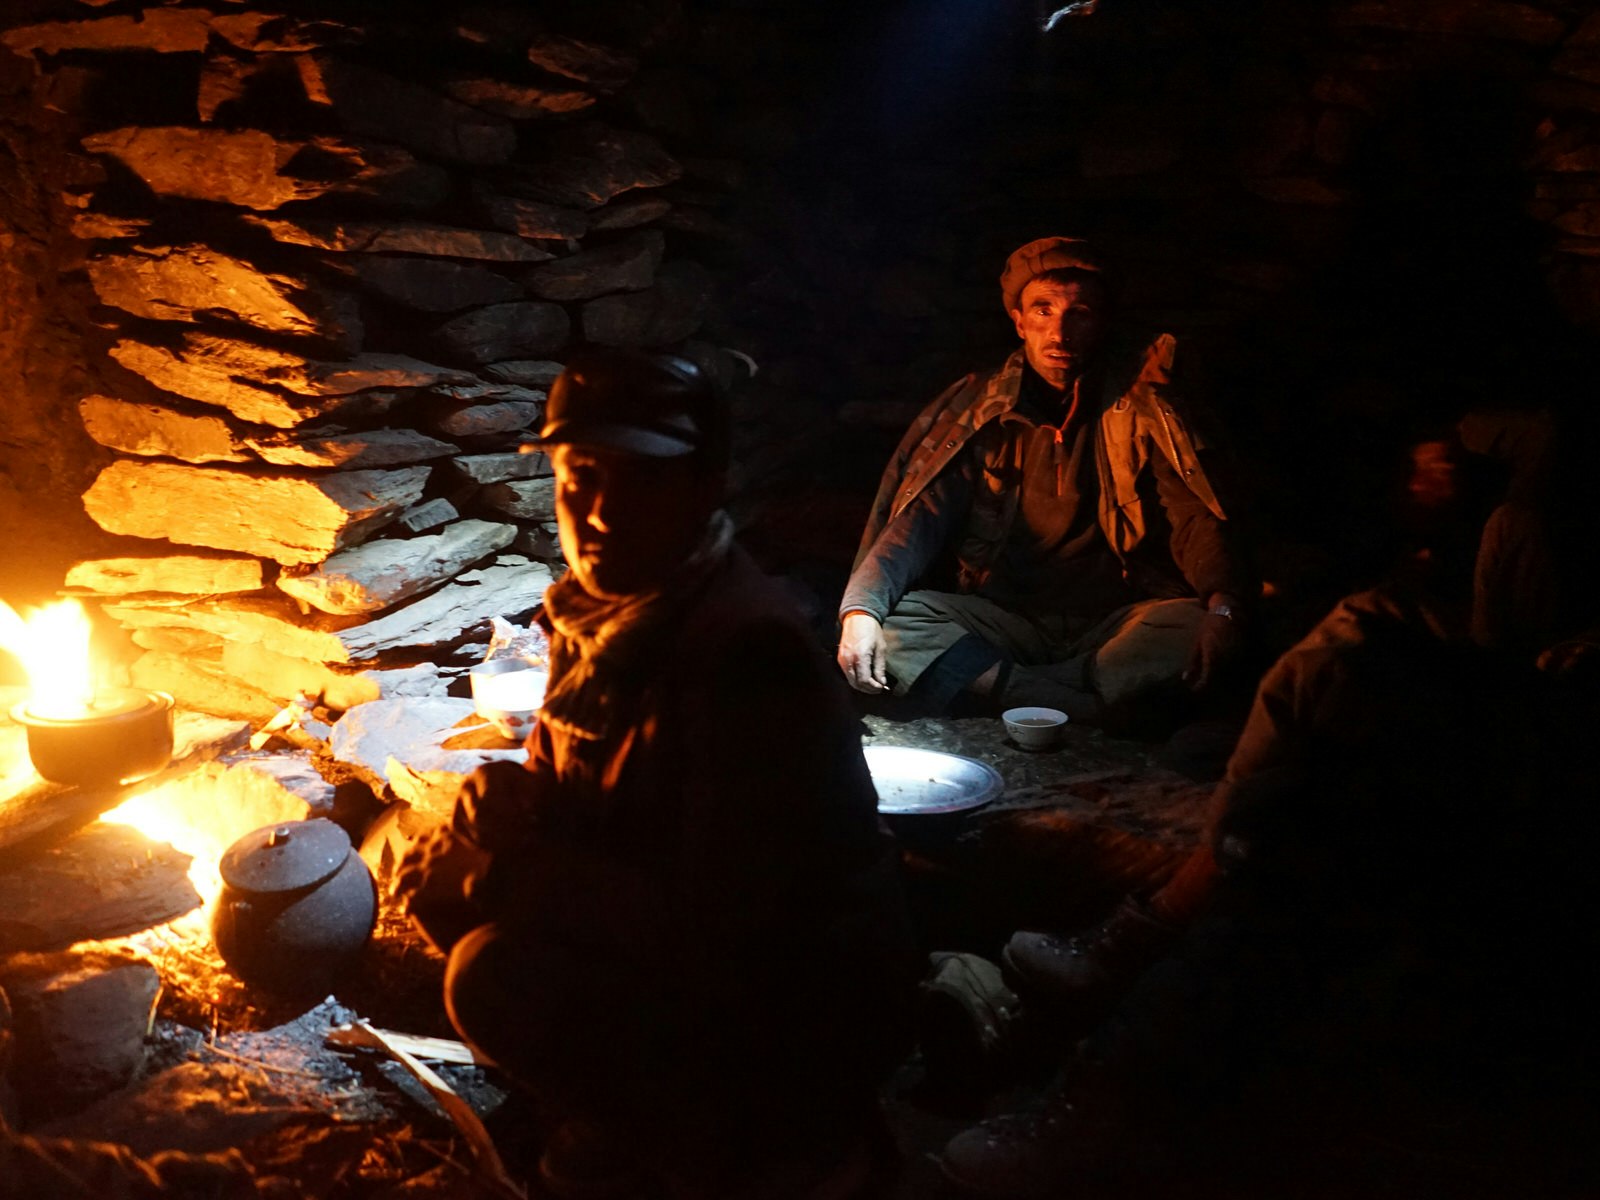 Night in the stone shelter, with a fire to the left and men in traditional hats seated half in the dark